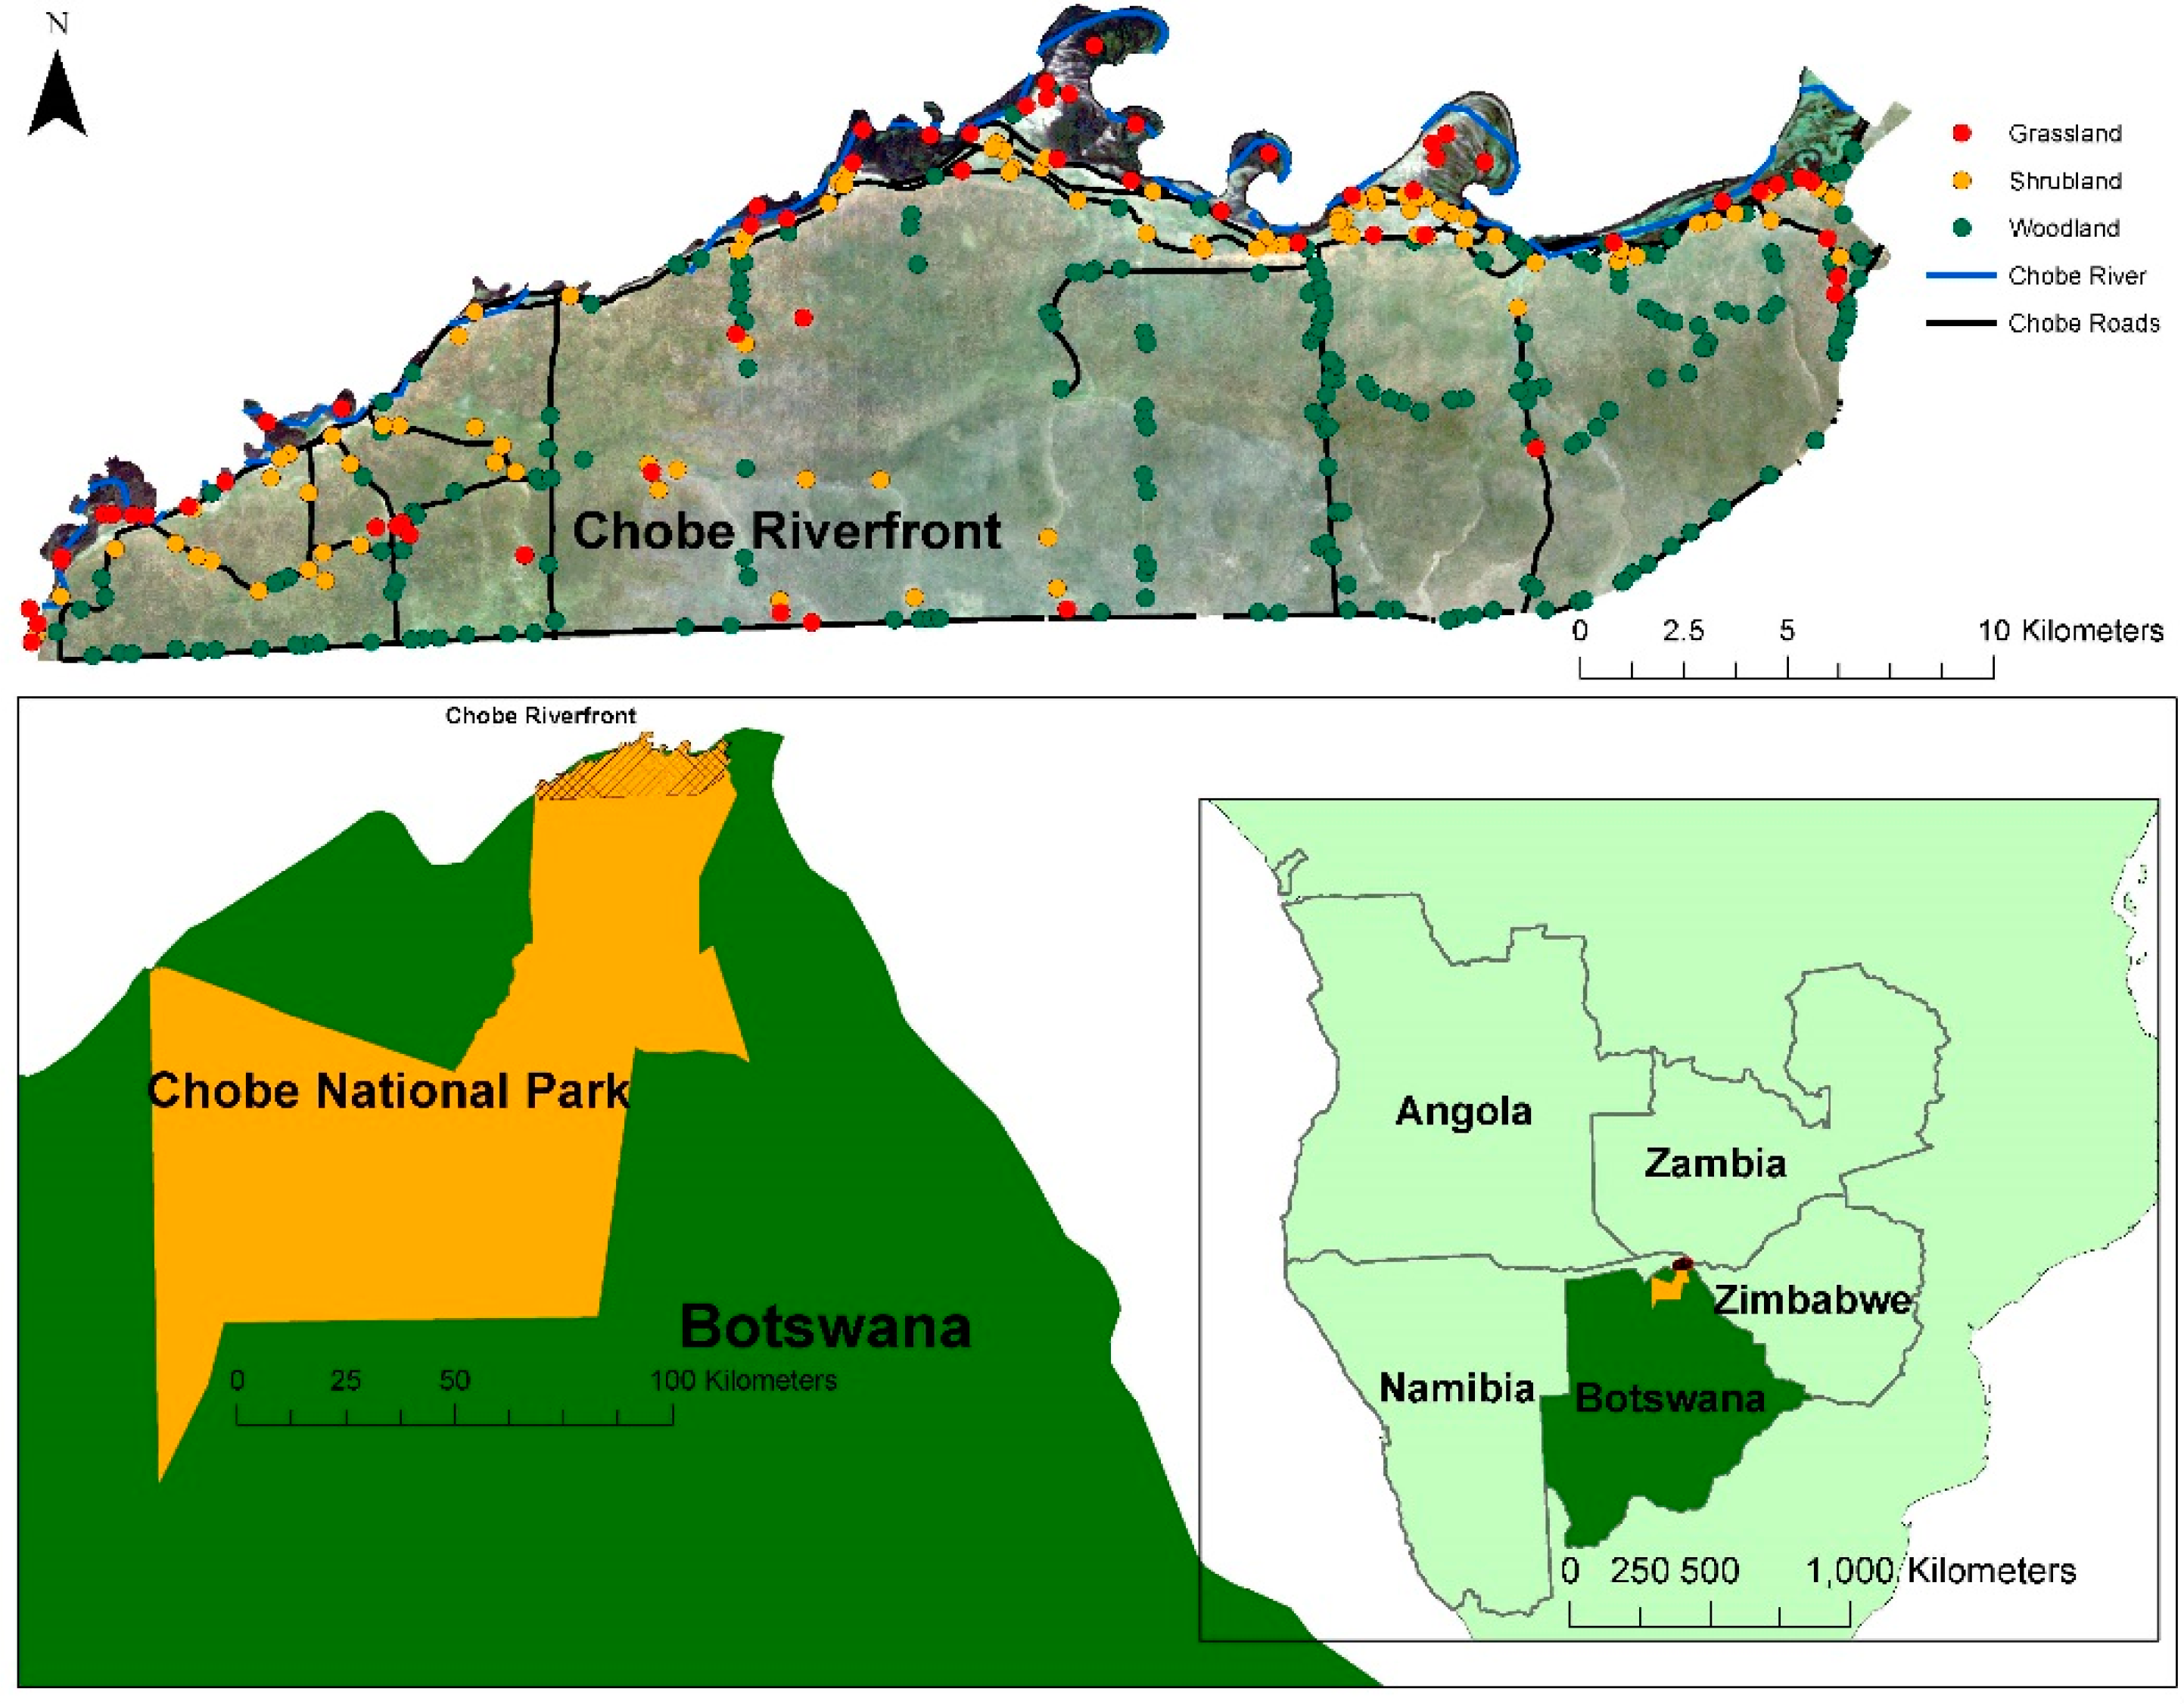 Remote Sensing | Free Full-Text | Utilizing Multiple Lines of Evidence to  Determine Landscape Degradation within Protected Area Landscapes: A Case  Study of Chobe National Park, Botswana from 1982 to 2011 | HTML